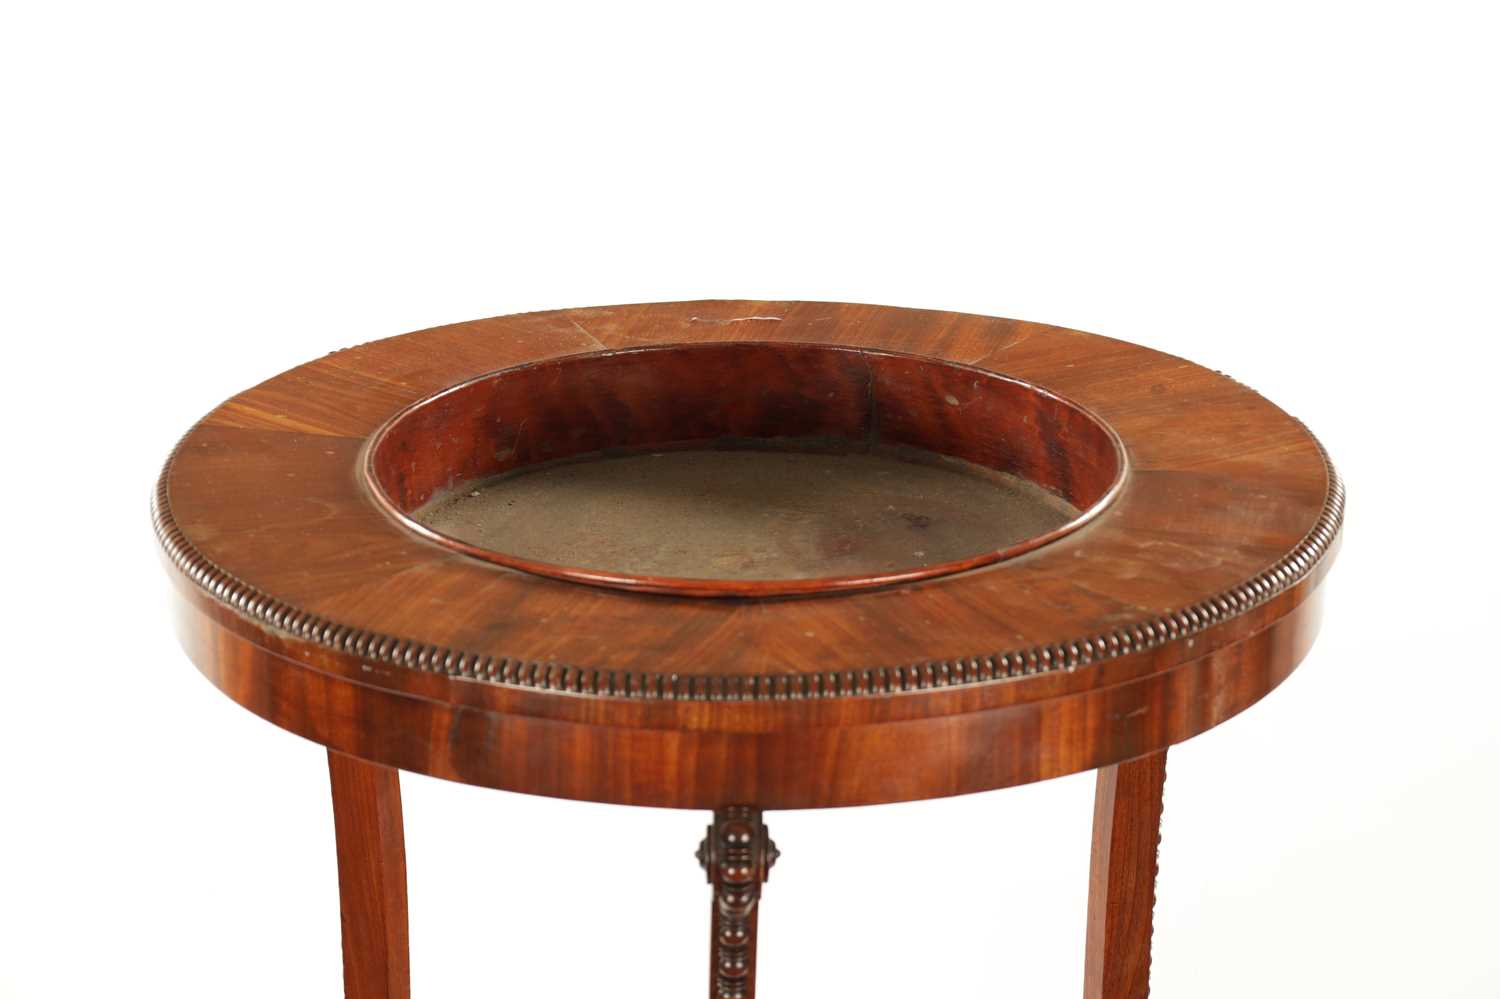 A REGENCY TWO TIER MAHOGANY JARDINIERE STAND WITH BEADED DECORATION - Image 2 of 6